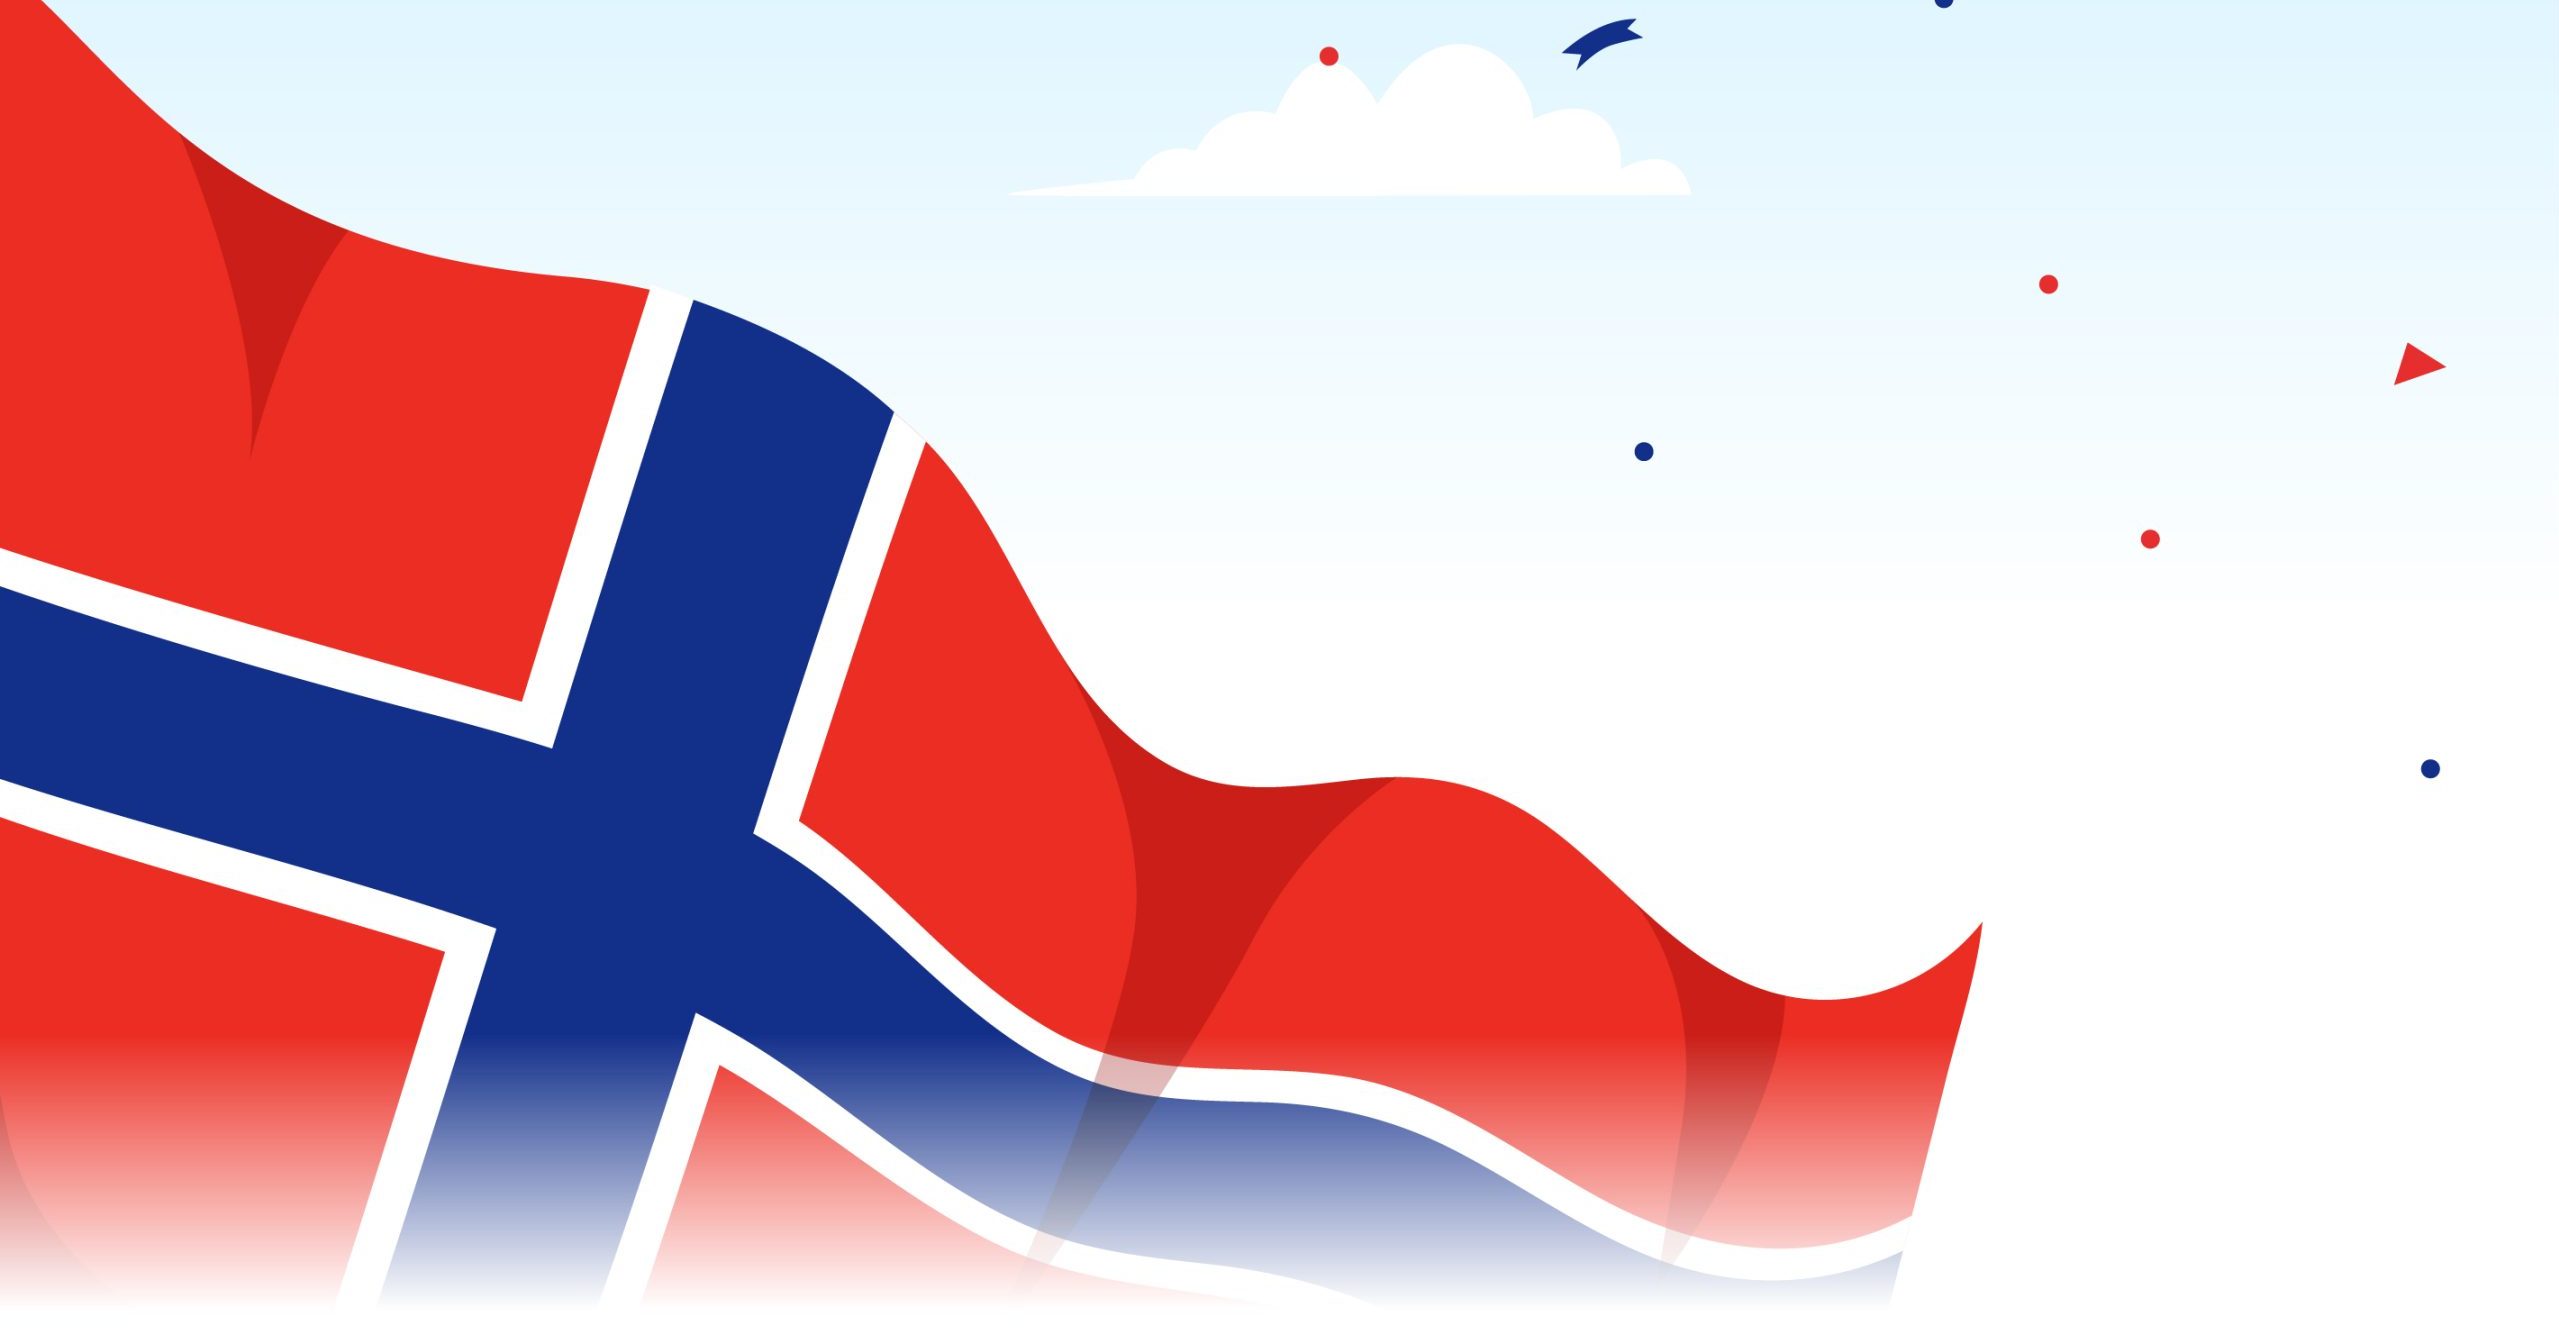 norsk flagg